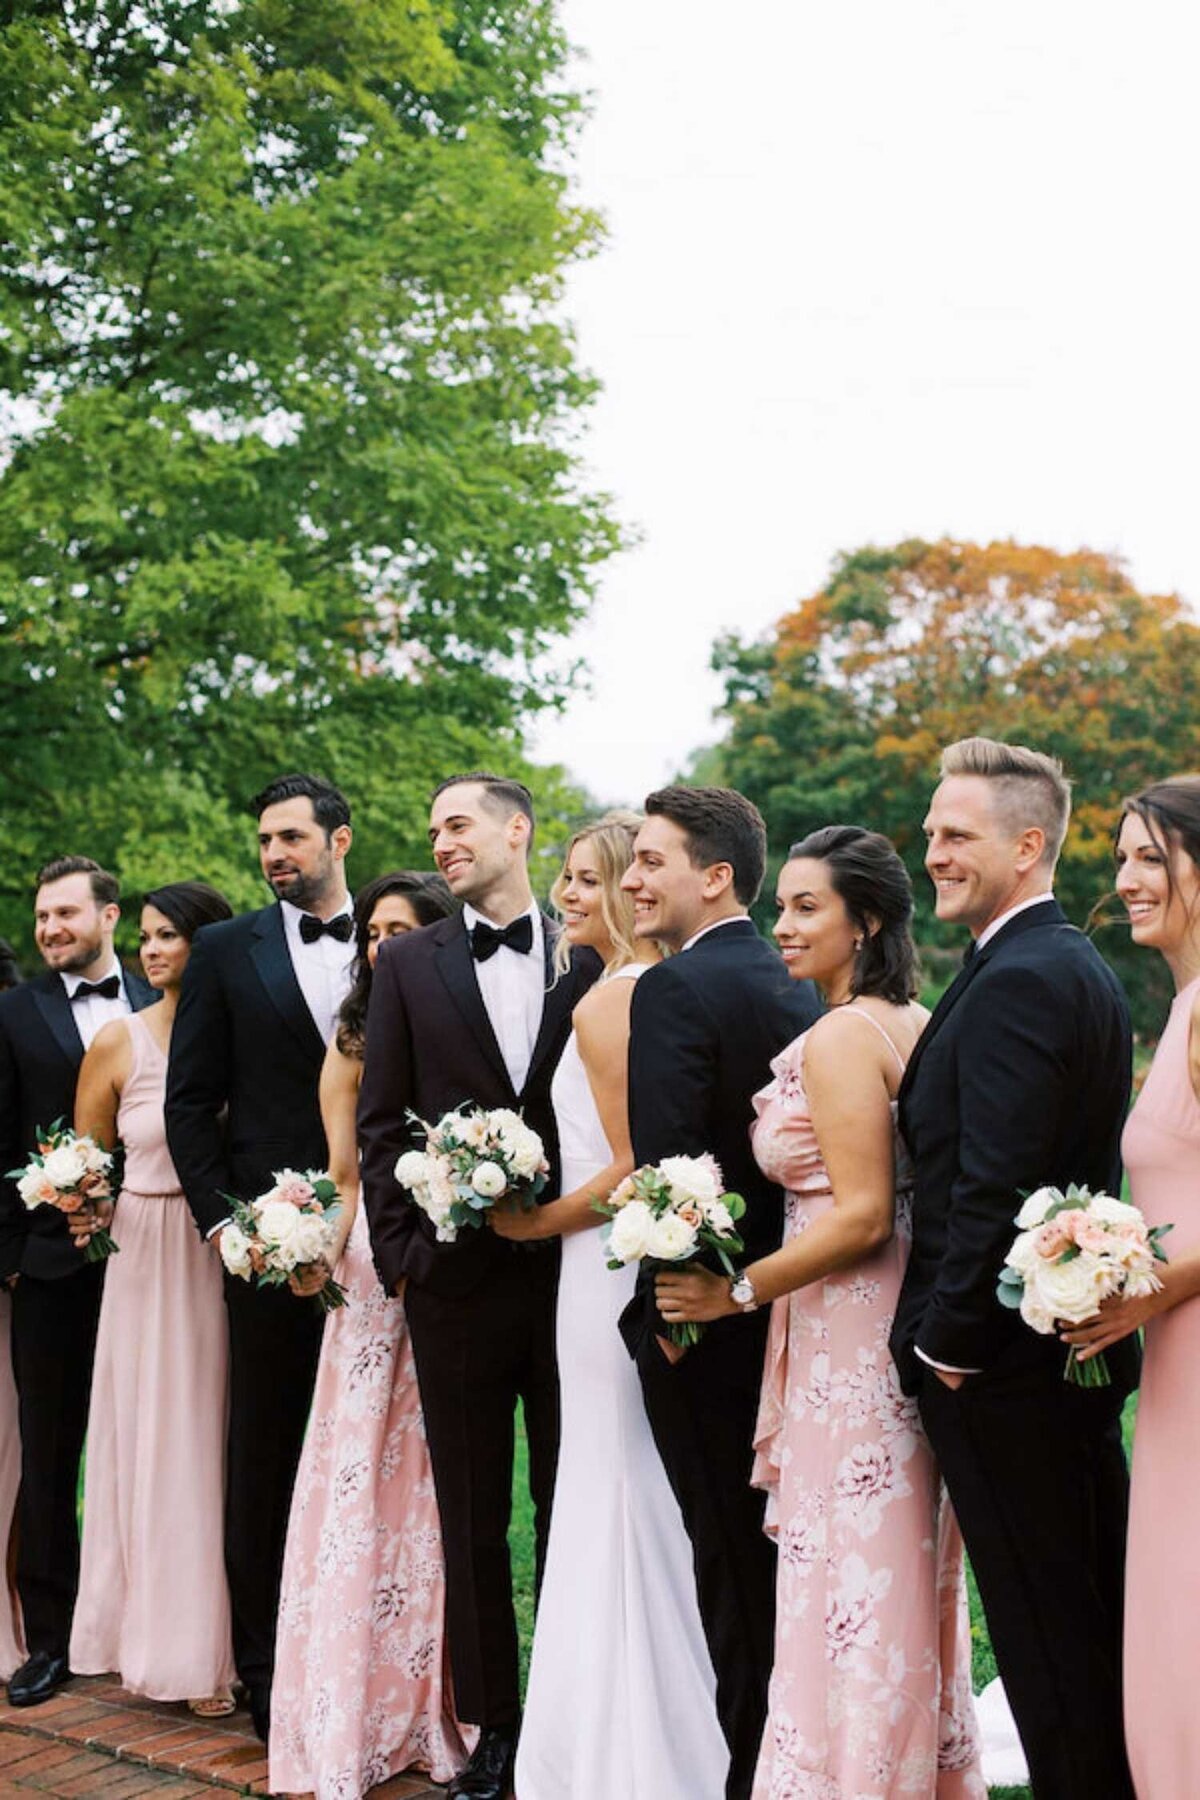 Wedding party in black tie and mixed prints before a luxury Chicago outdoor garden wedding.